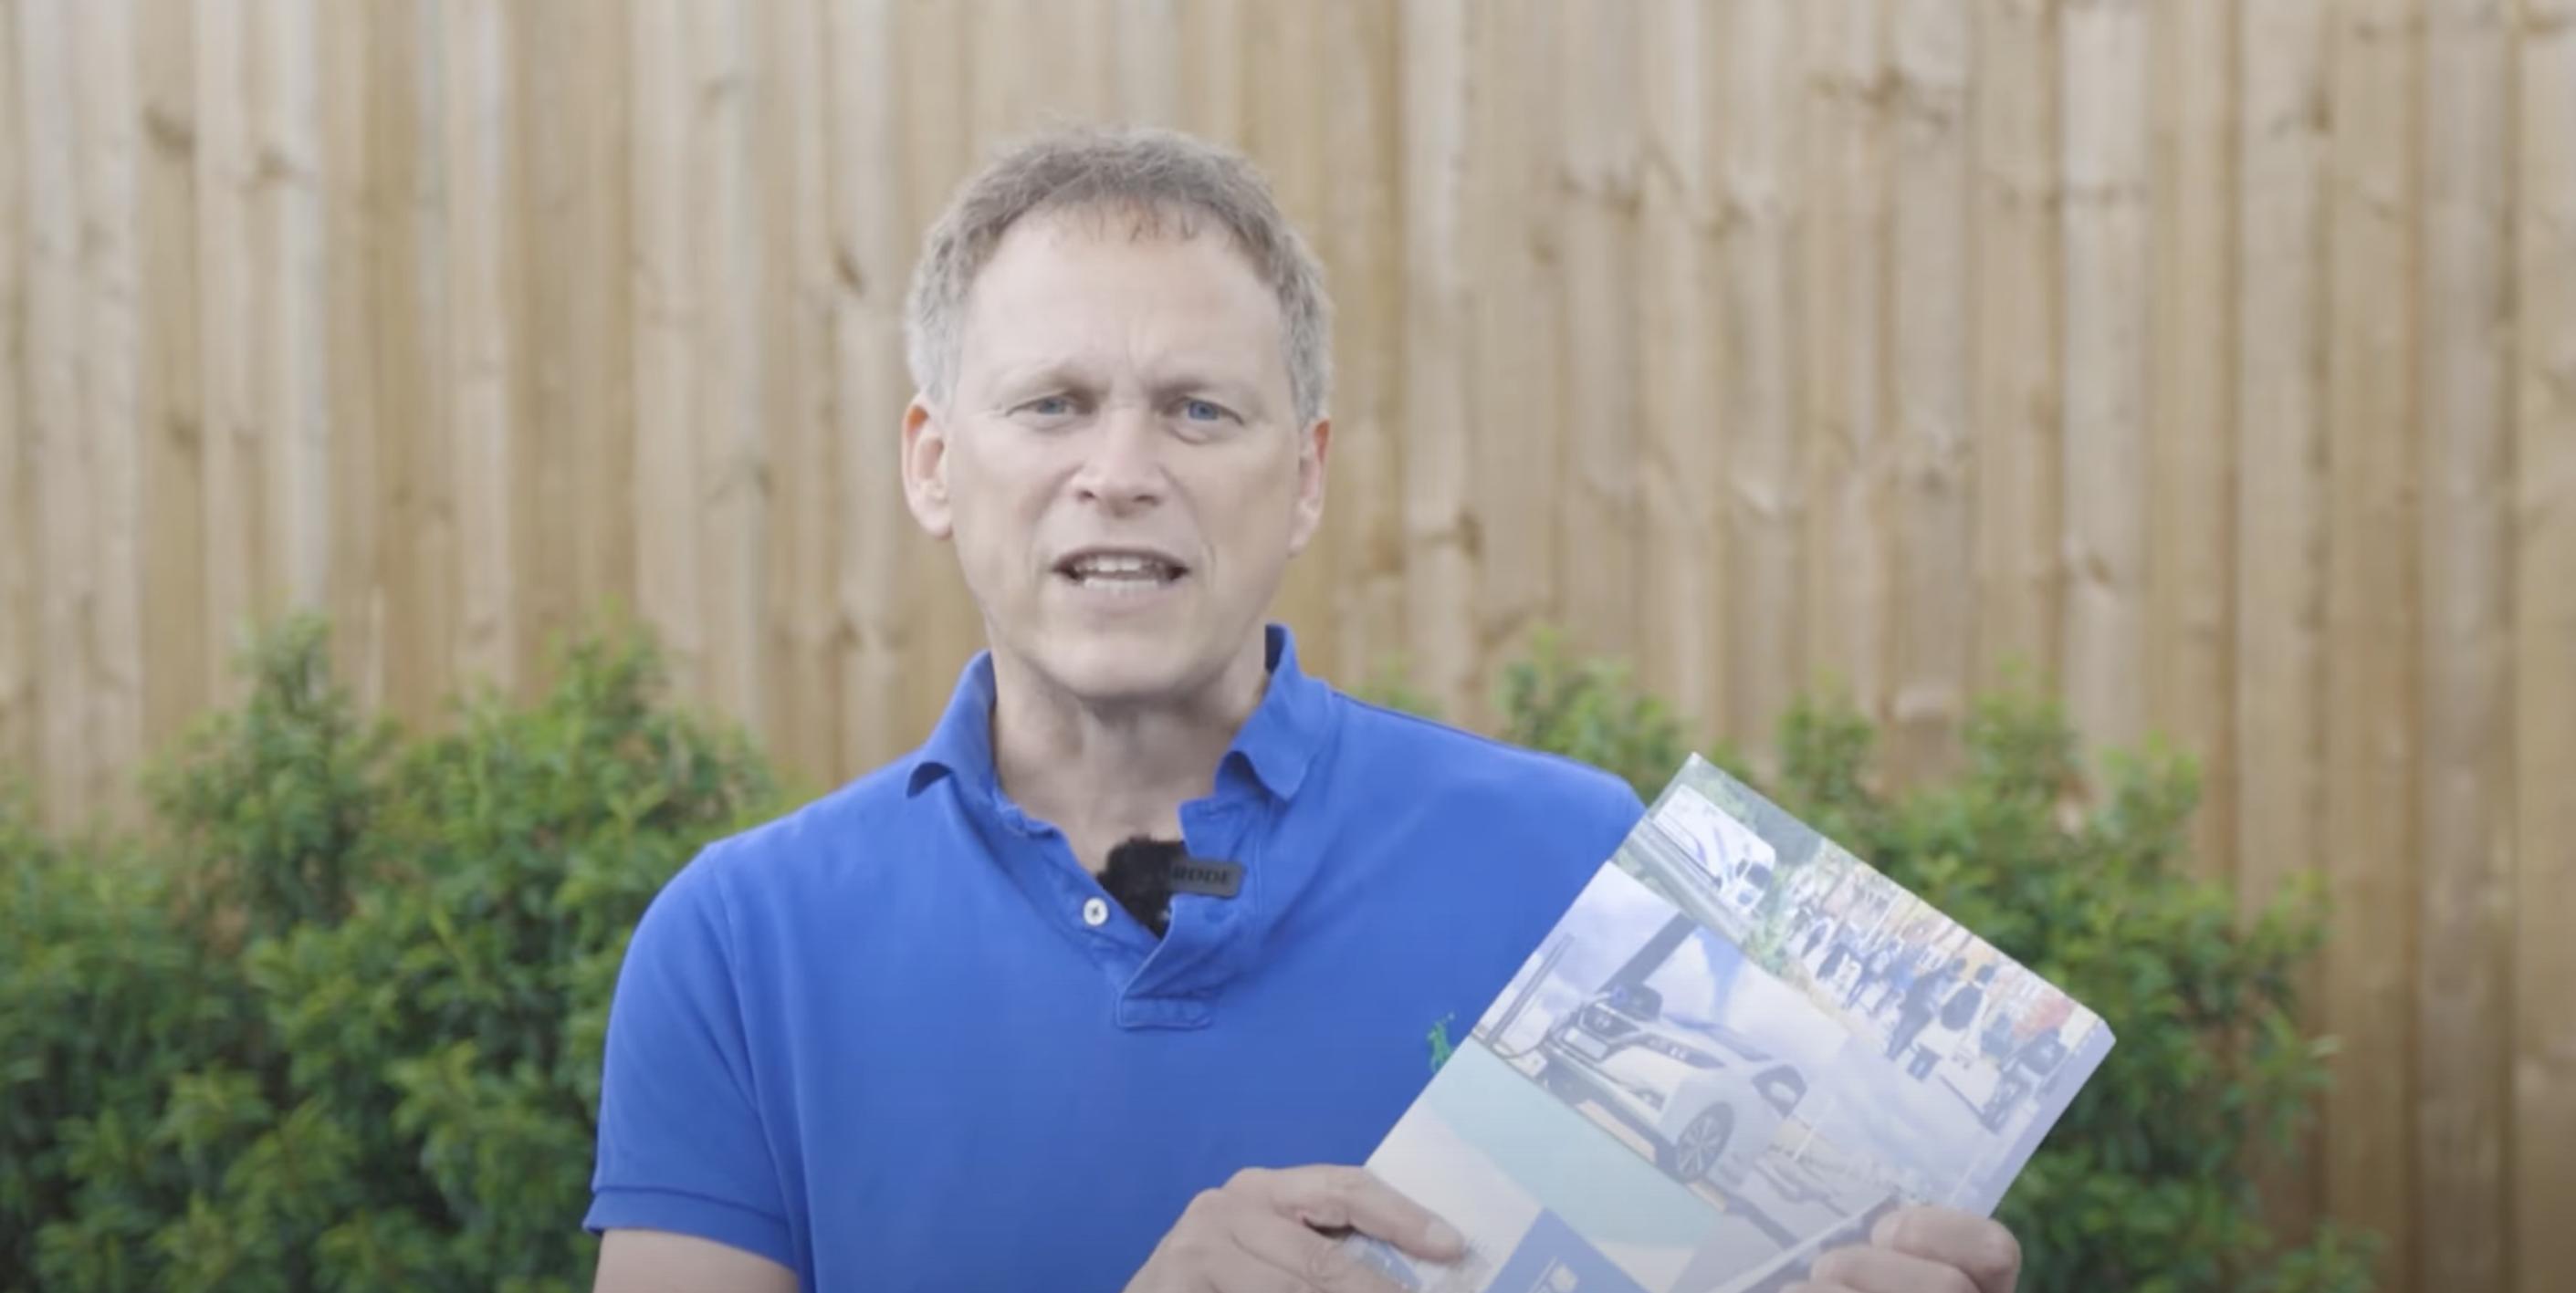 Transport secretary Grant Shapps unveiled Decarbonsing Transport in a DfT video